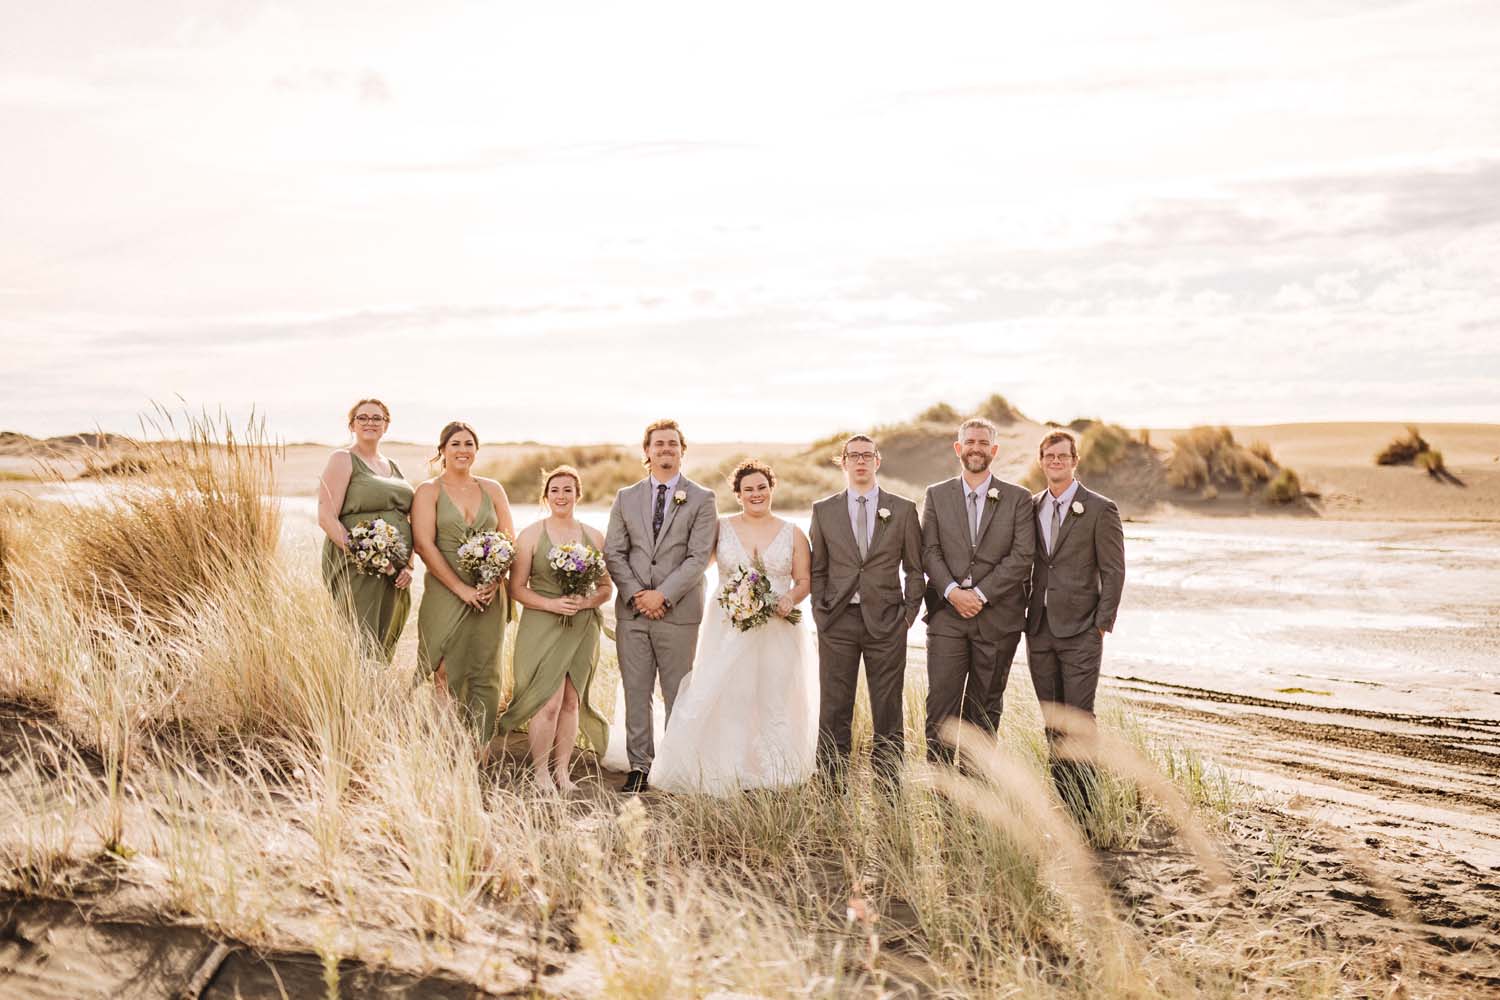 Tying the knot in Port Waikato